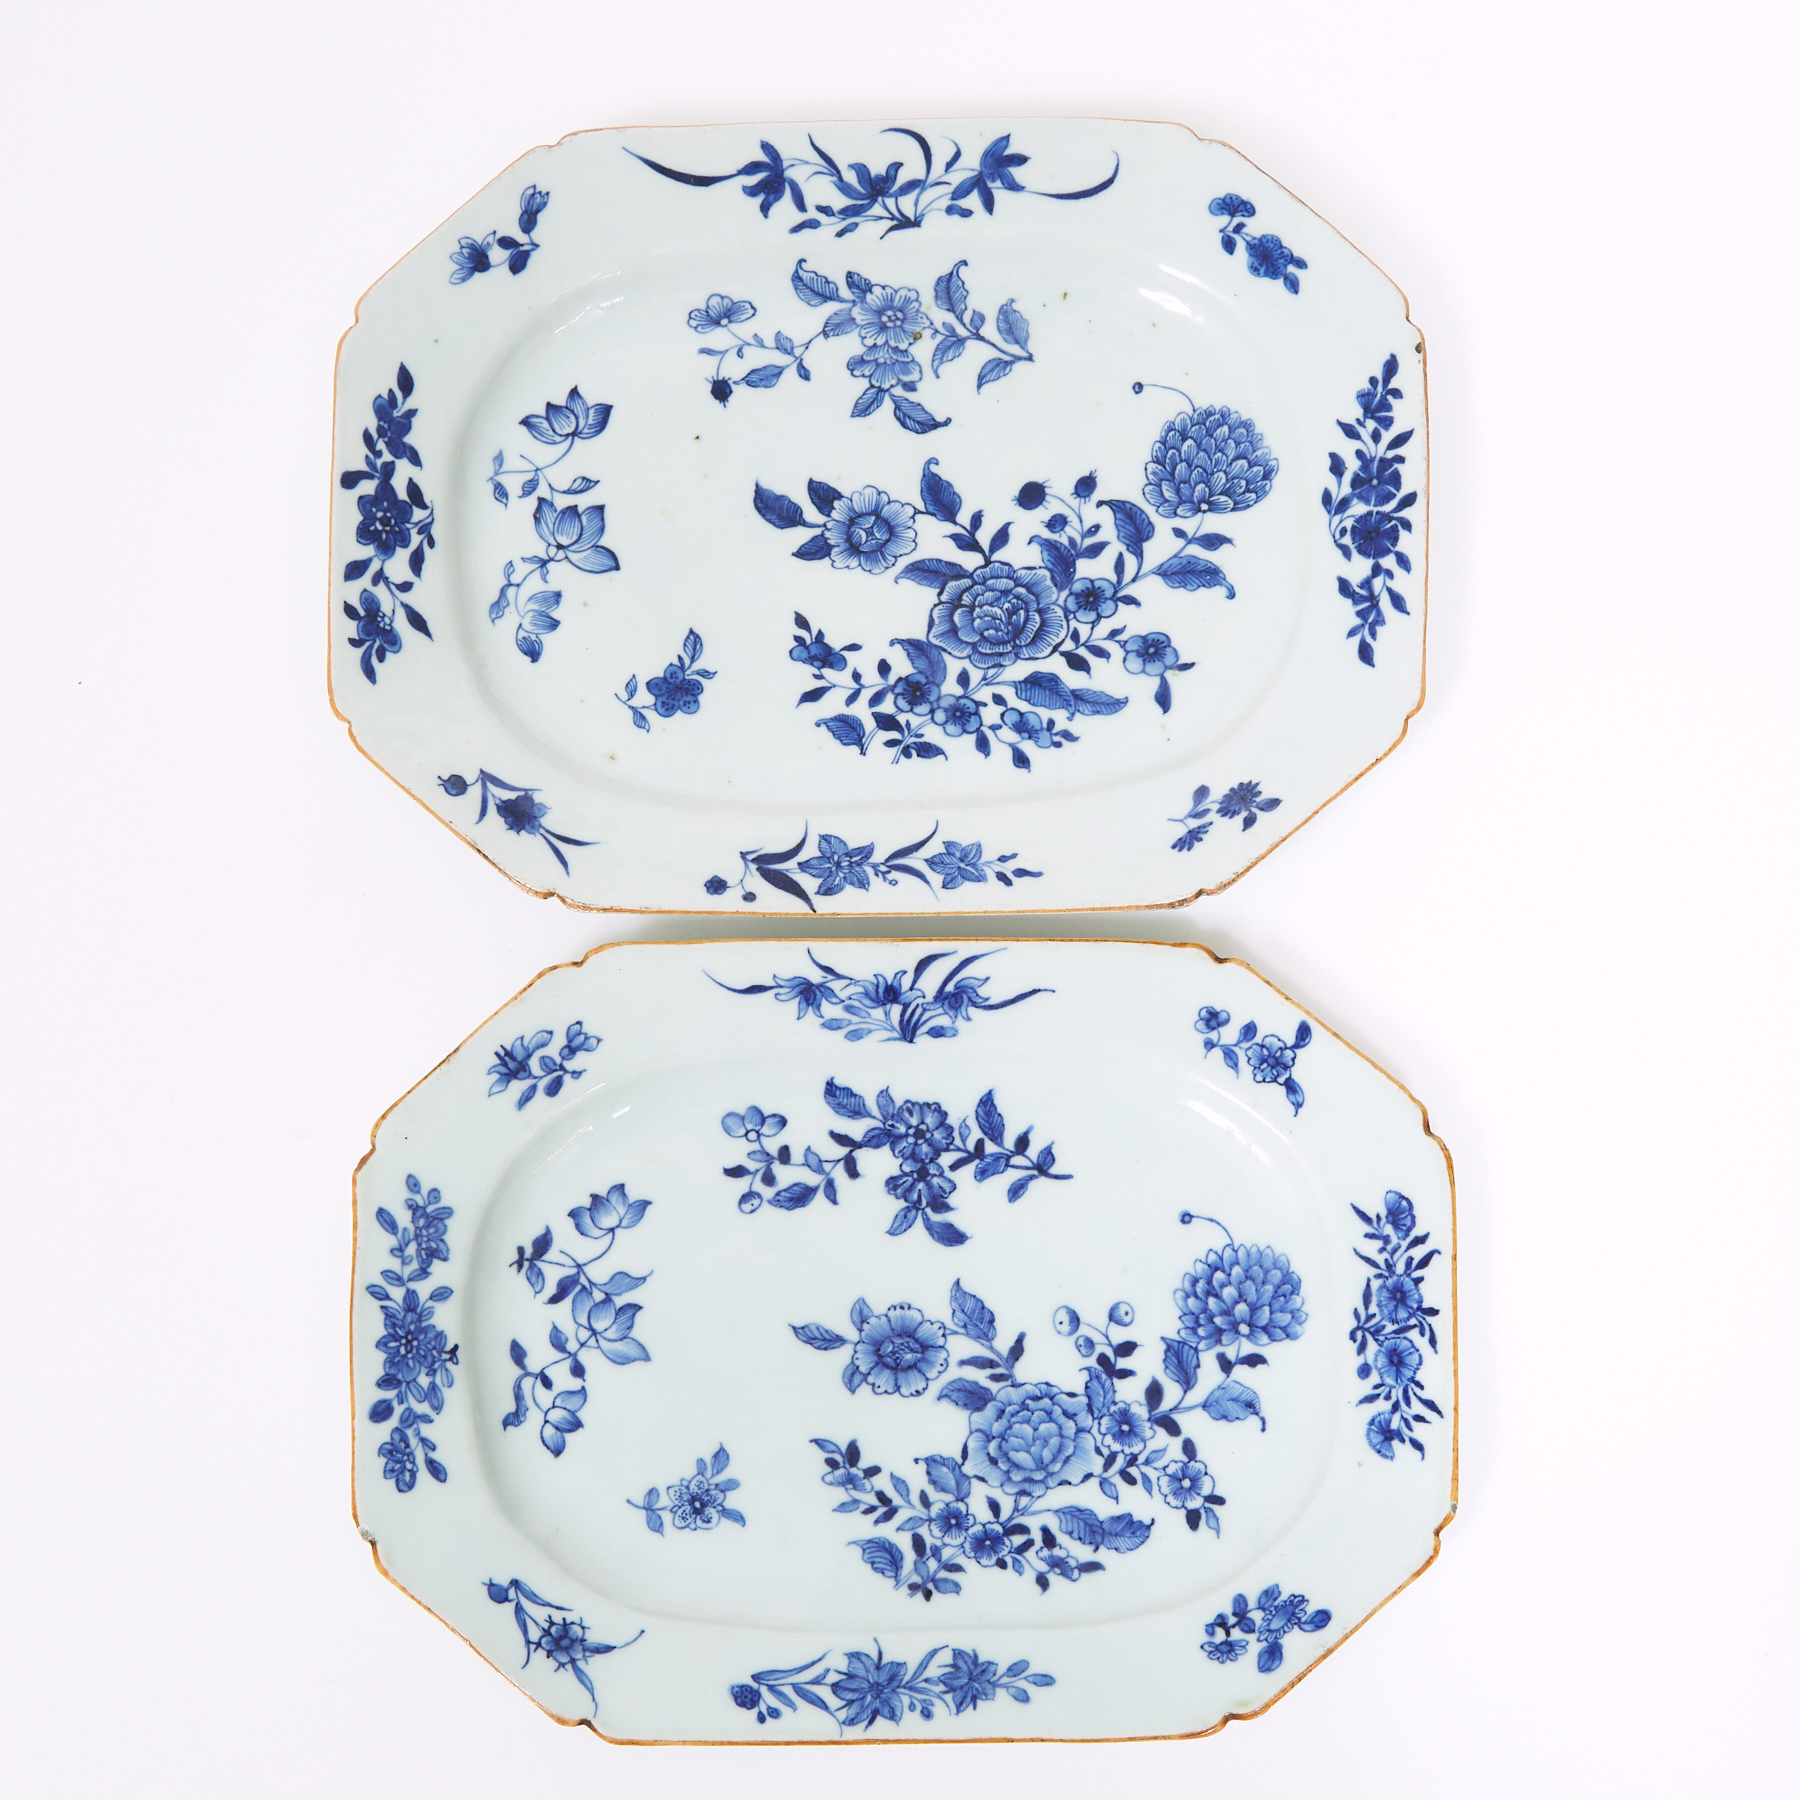 A Pair of Blue and White Rectangular Platters, 18th Century